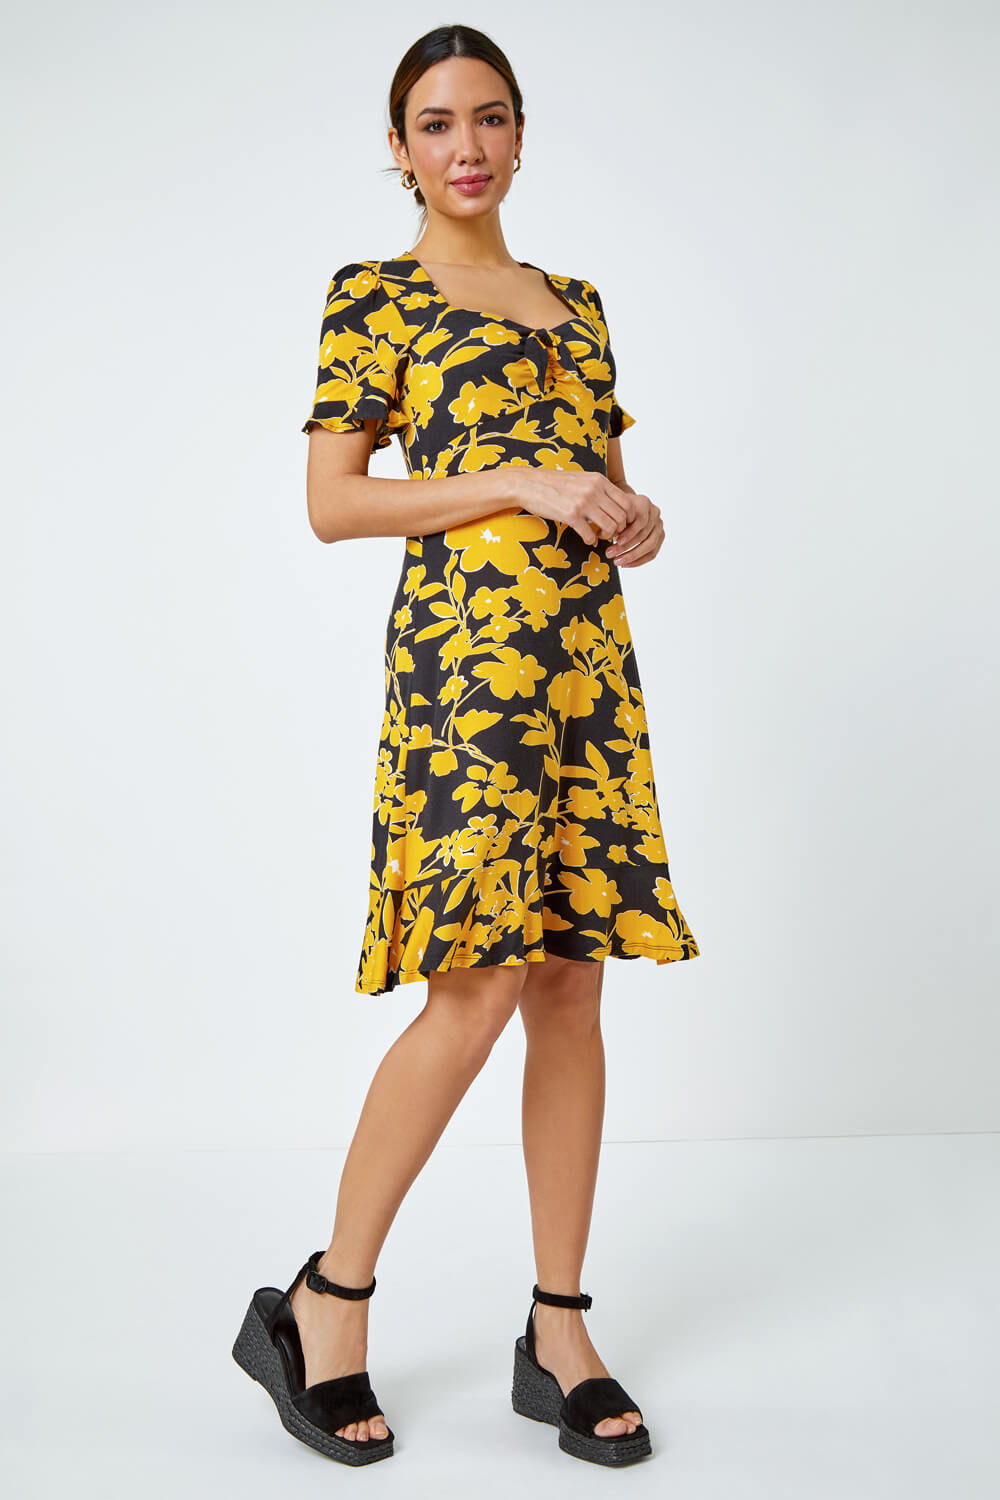 Yellow Floral Frill Hem Stretch Dress, Image 2 of 5